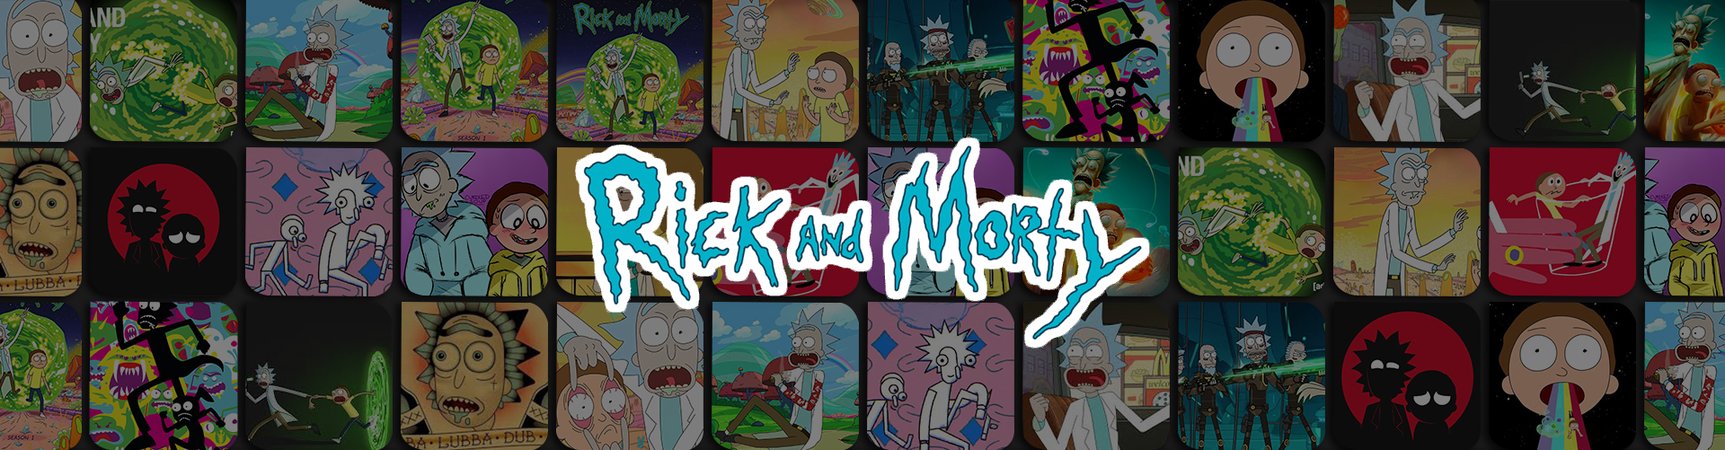 Rick & Morty Bookmarks